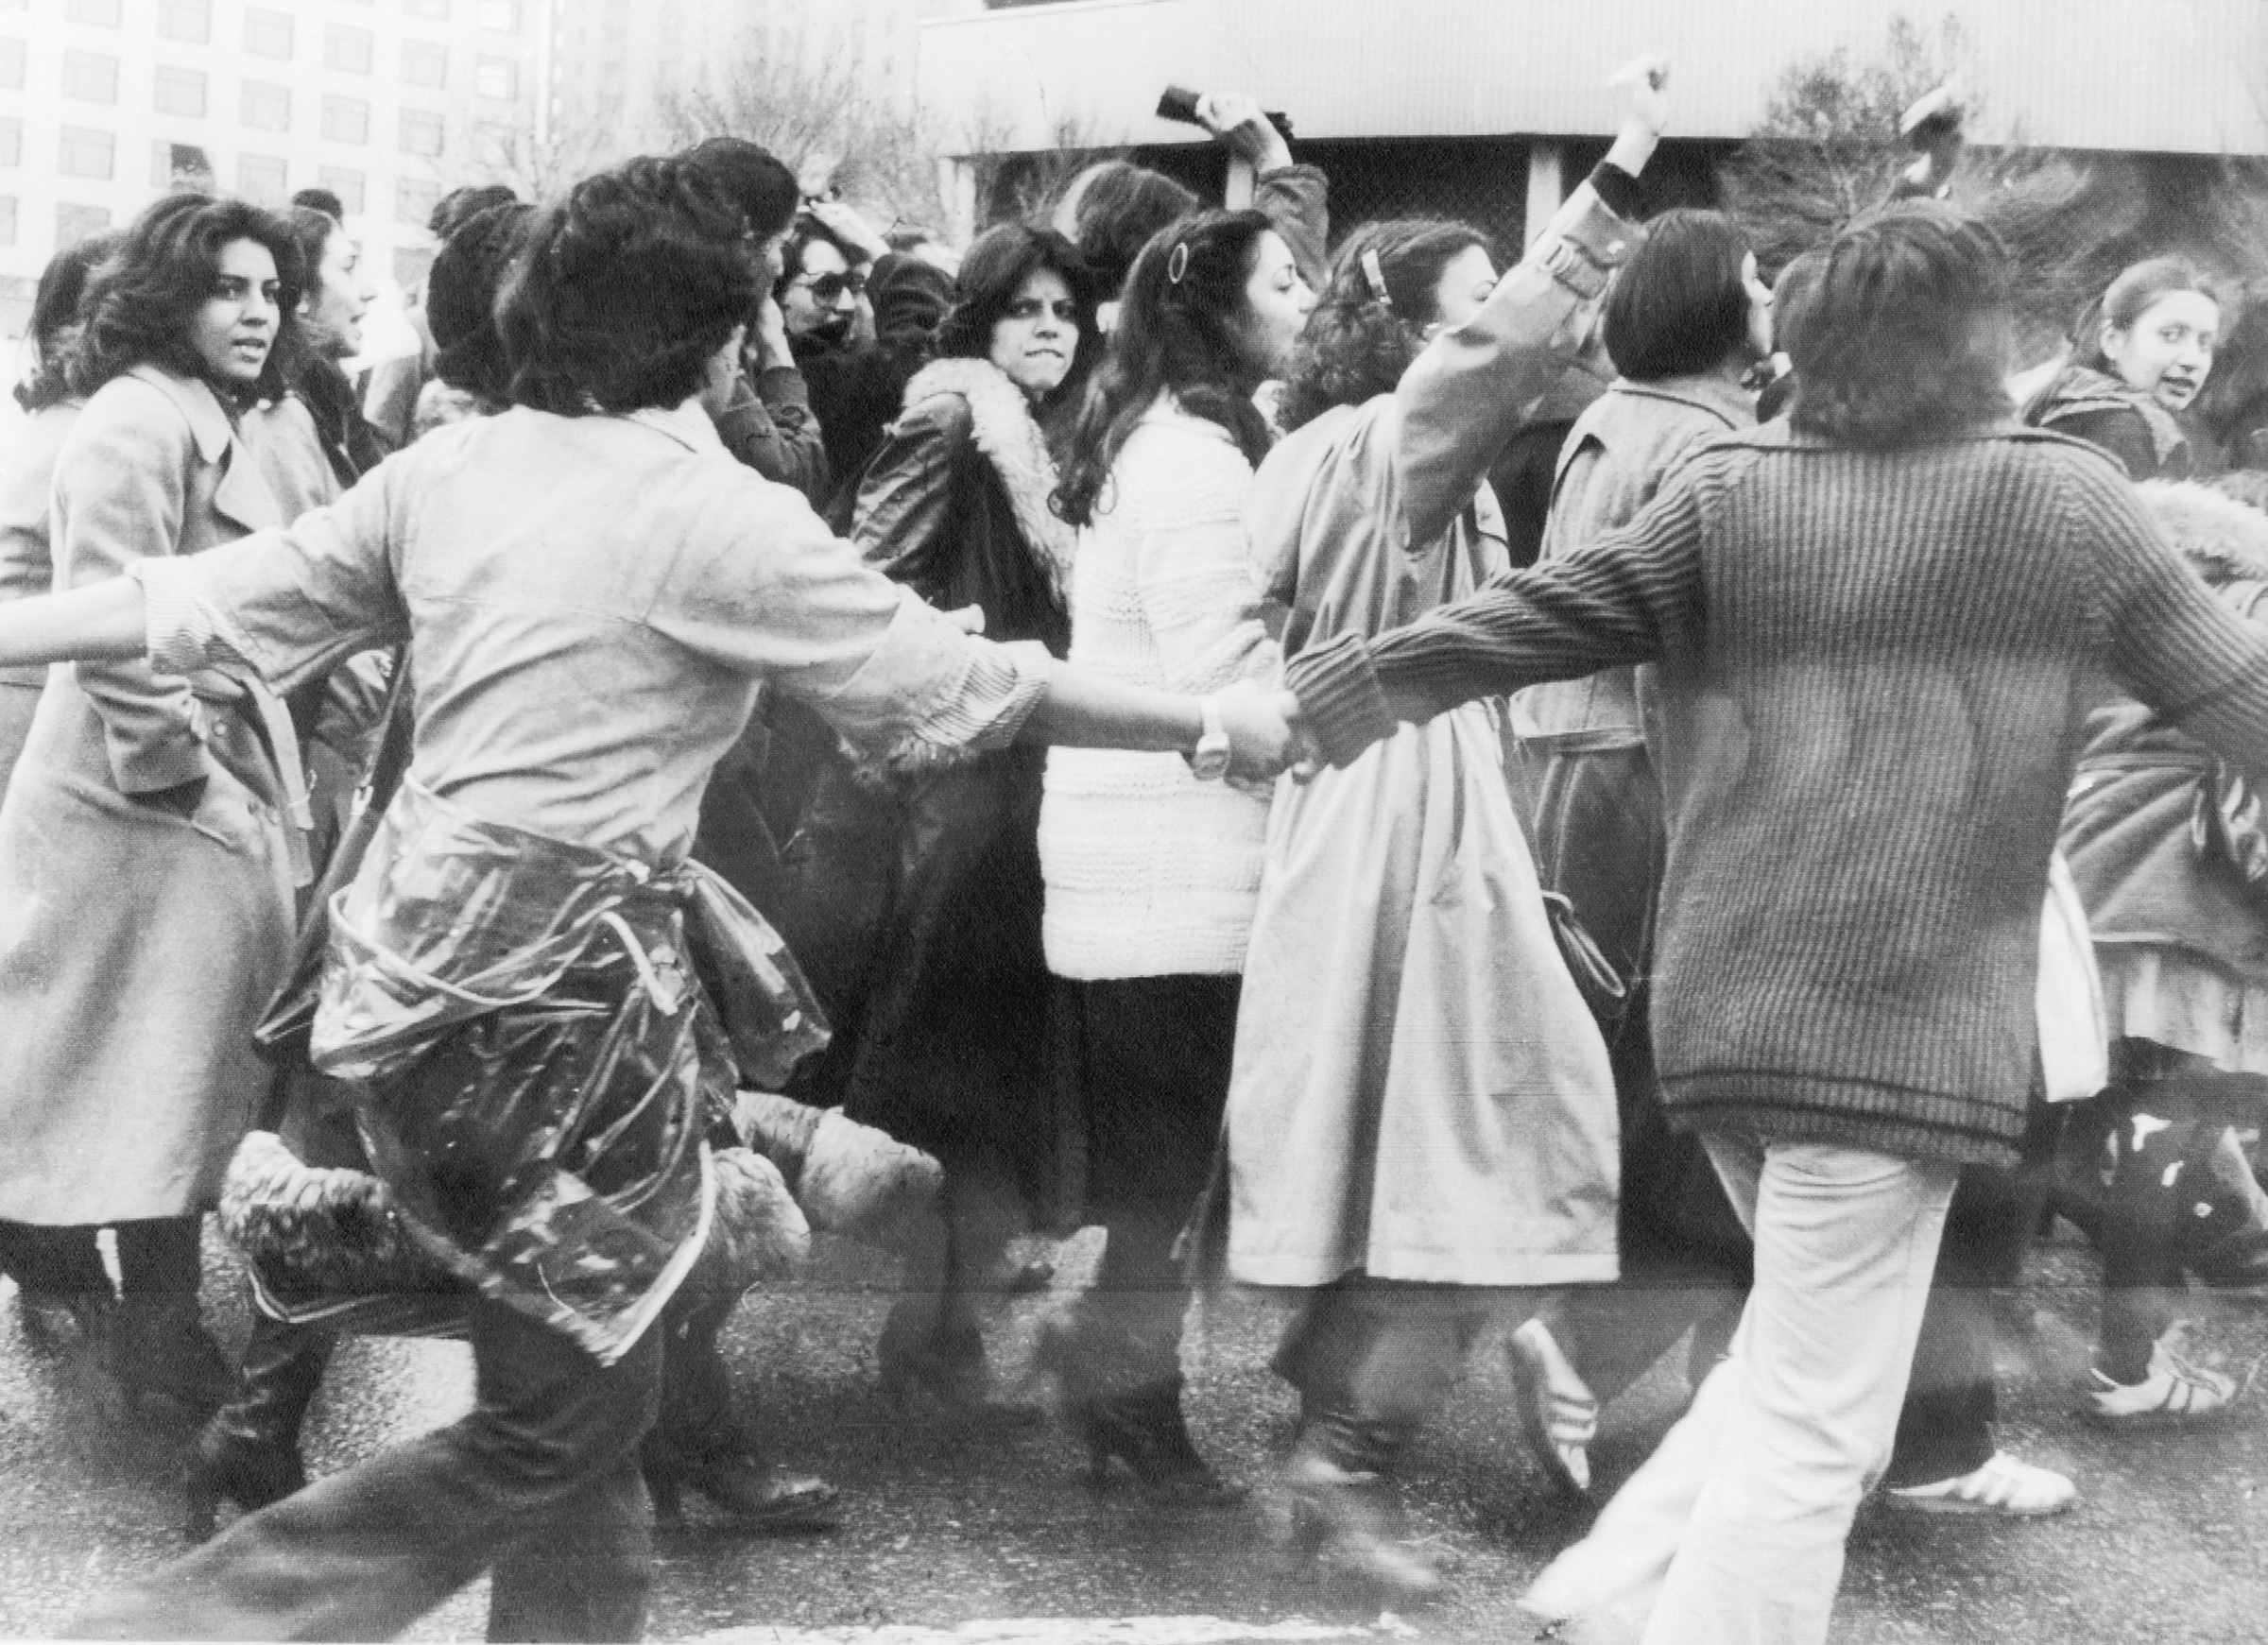 Women protestors, surrounded by men as a form of protection, march against the veil in Tehran, on March 10, 1979. (Bettmann Archive/Getty Images)